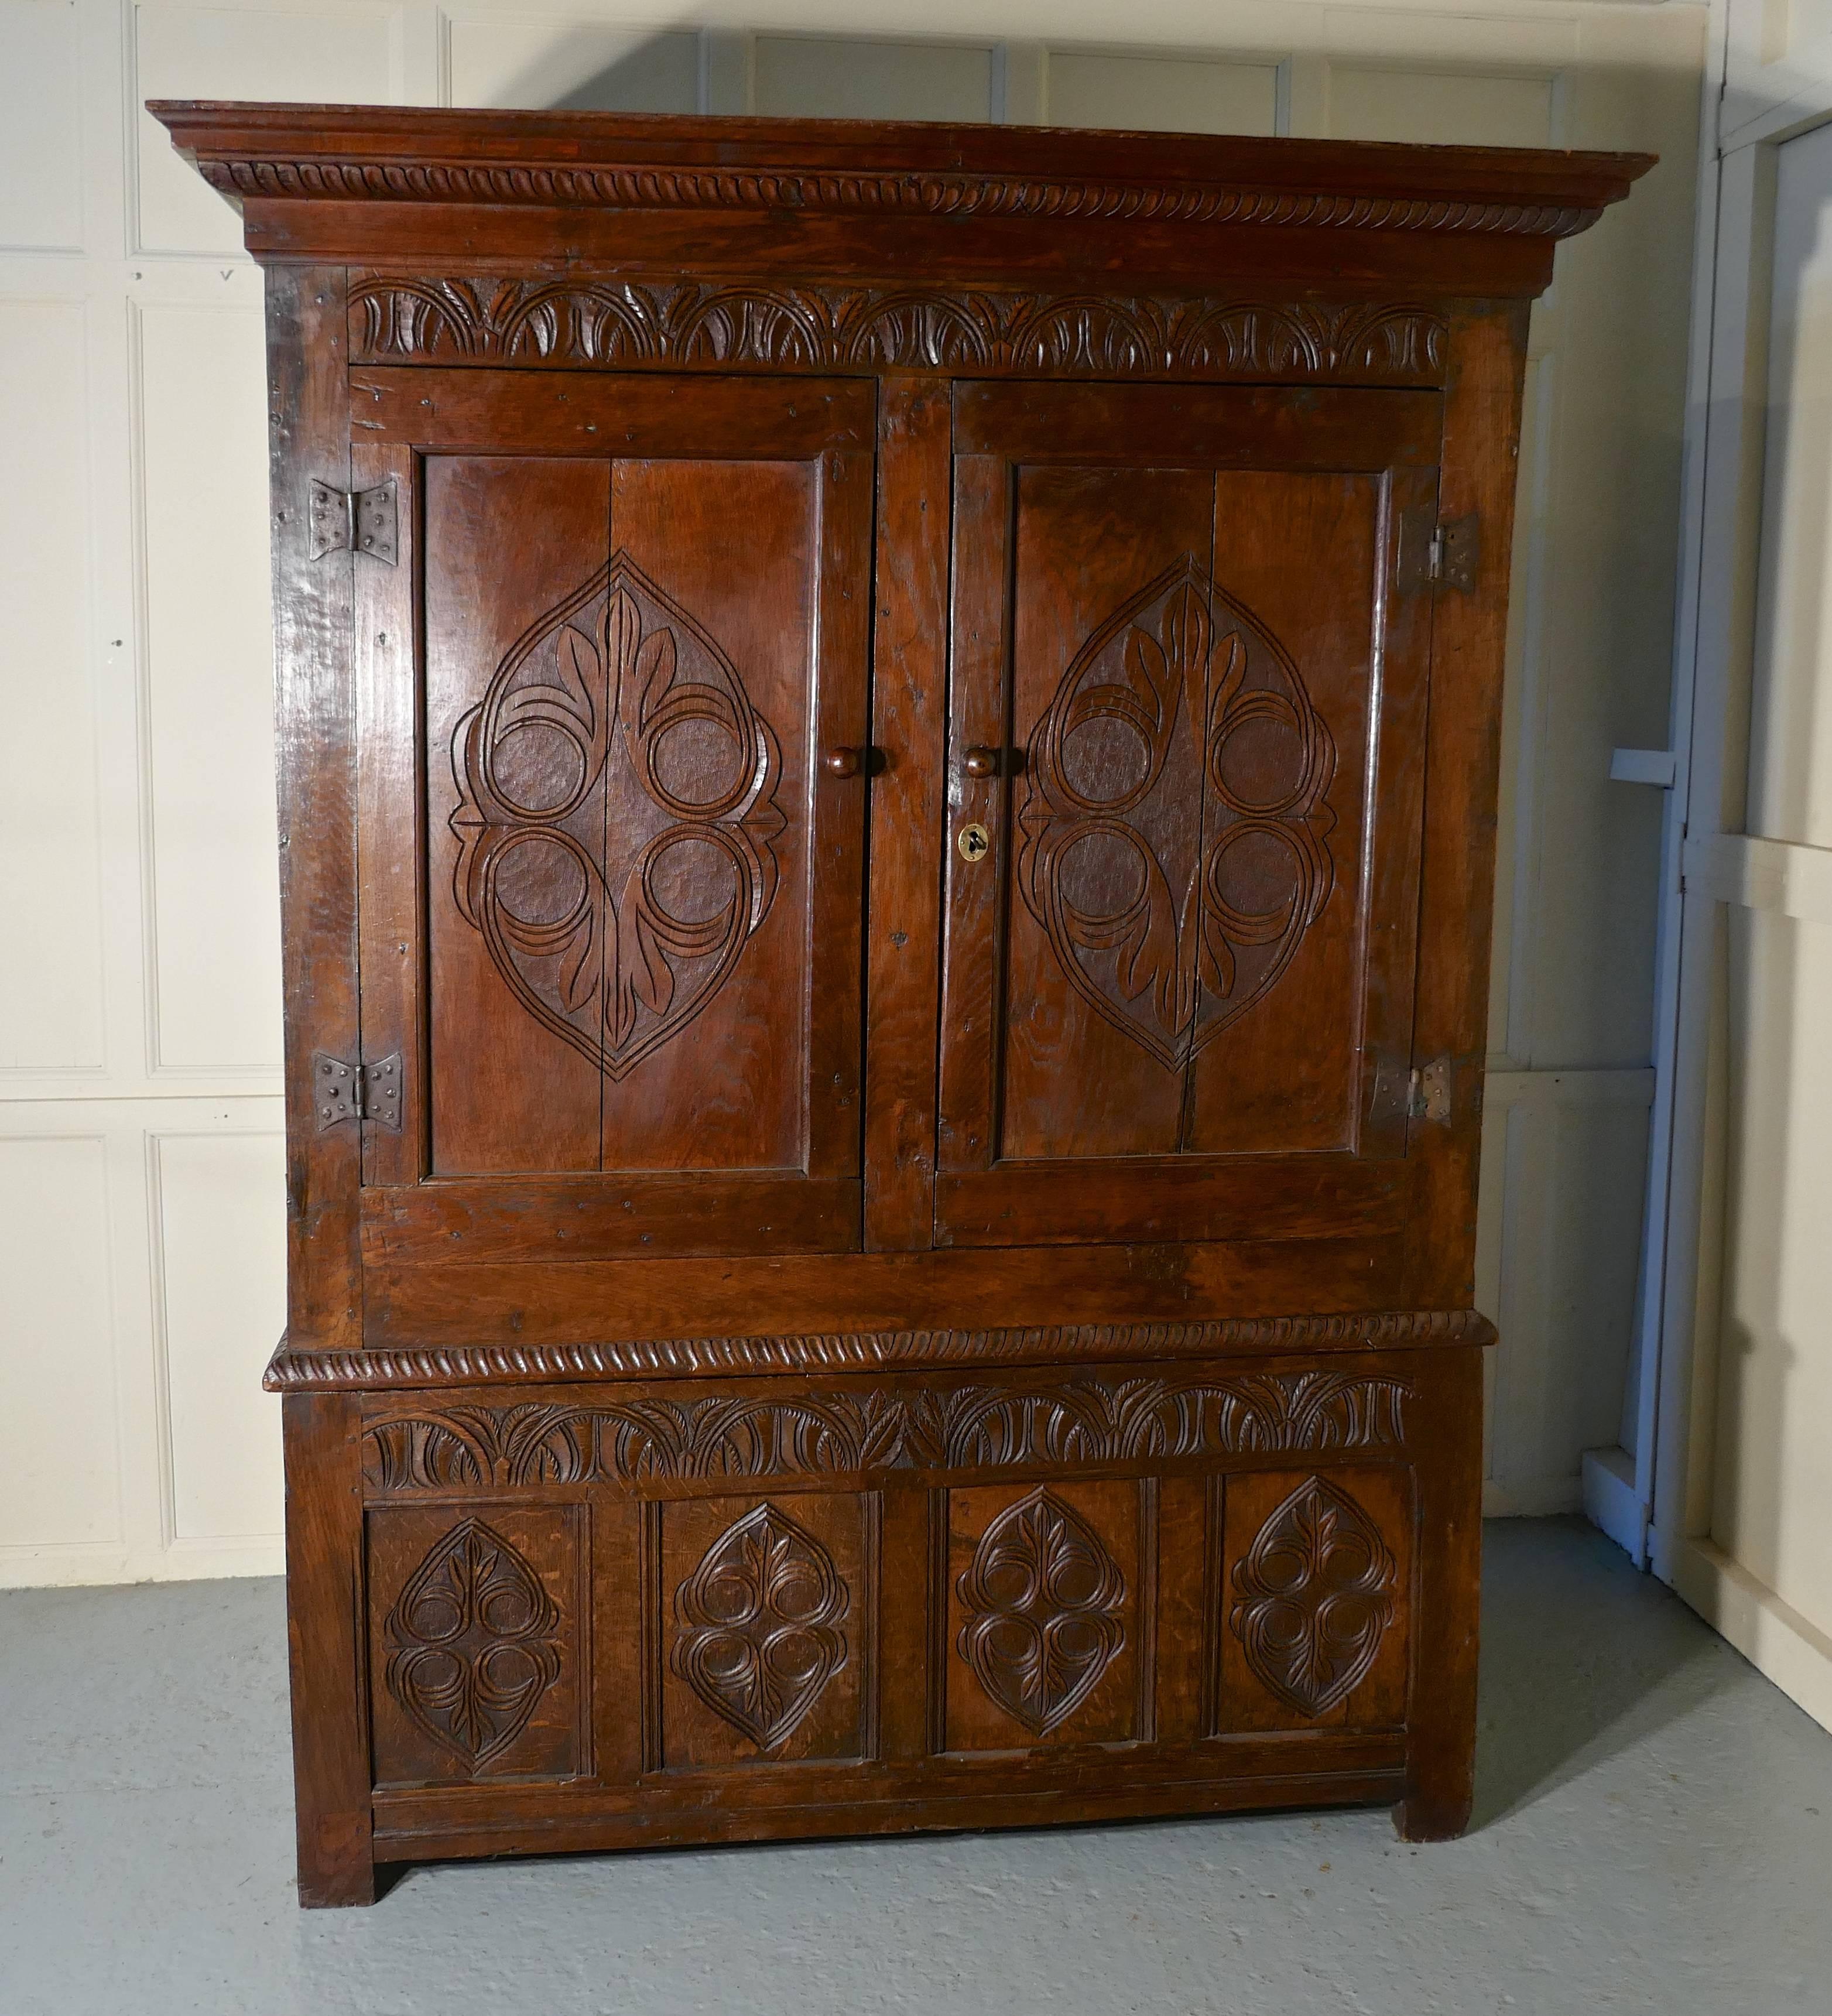 17th century welsh oak slab side housekeepers cupboard, wardrobe

This Old and roomy cupboard is made in solid oak and needless to say it is very heavy, luckily it does come into two pieces for transportation
The two large carved panels doors